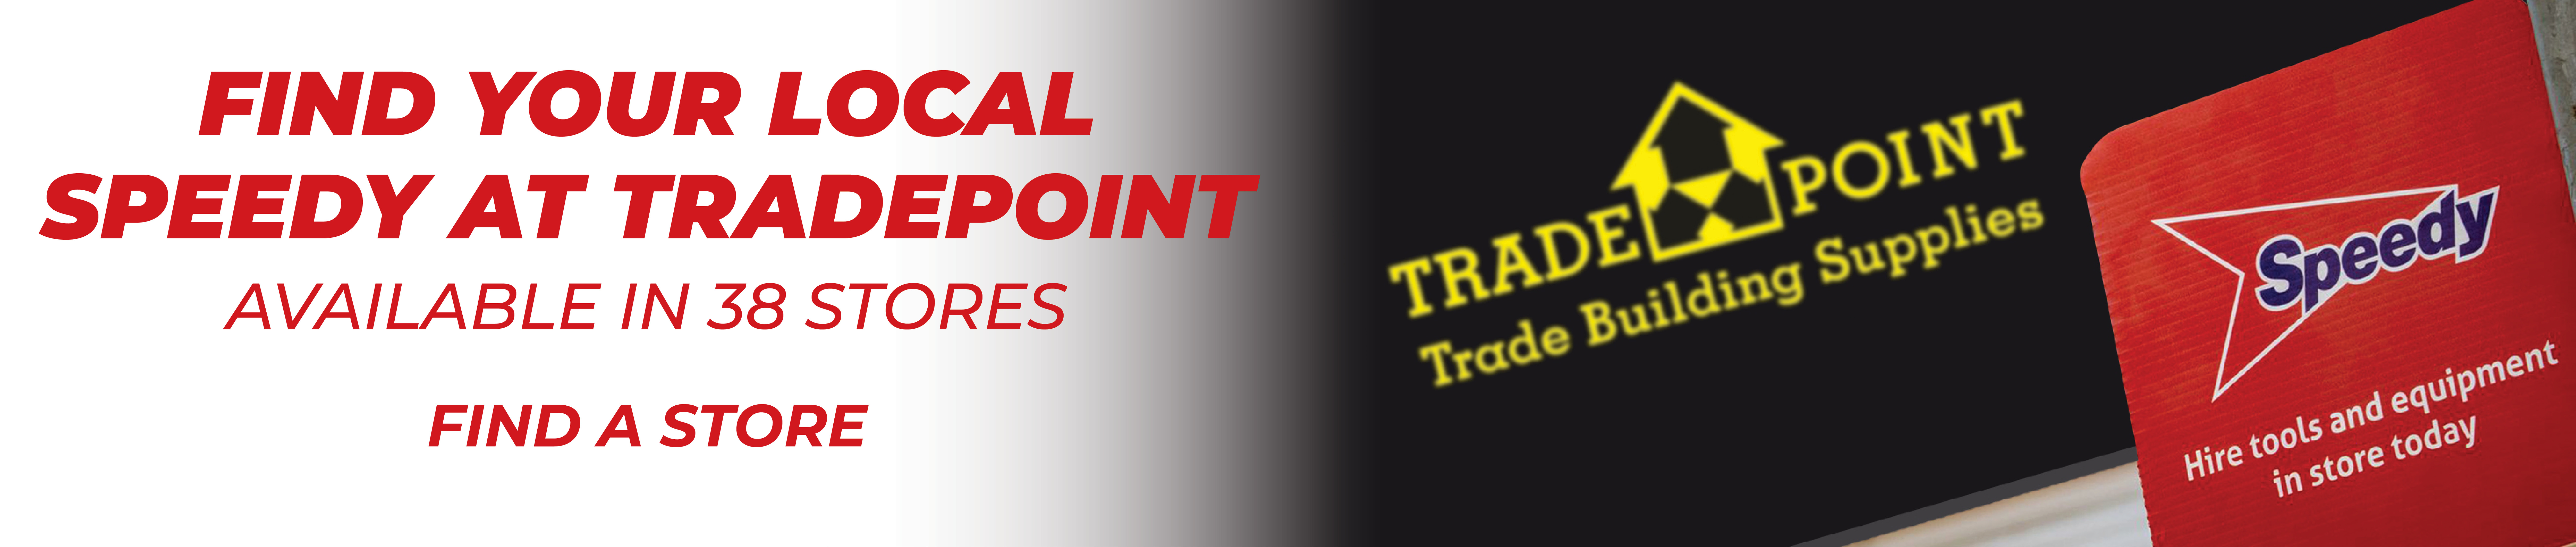 Tradepoint store locator banner_38 stores.jpg